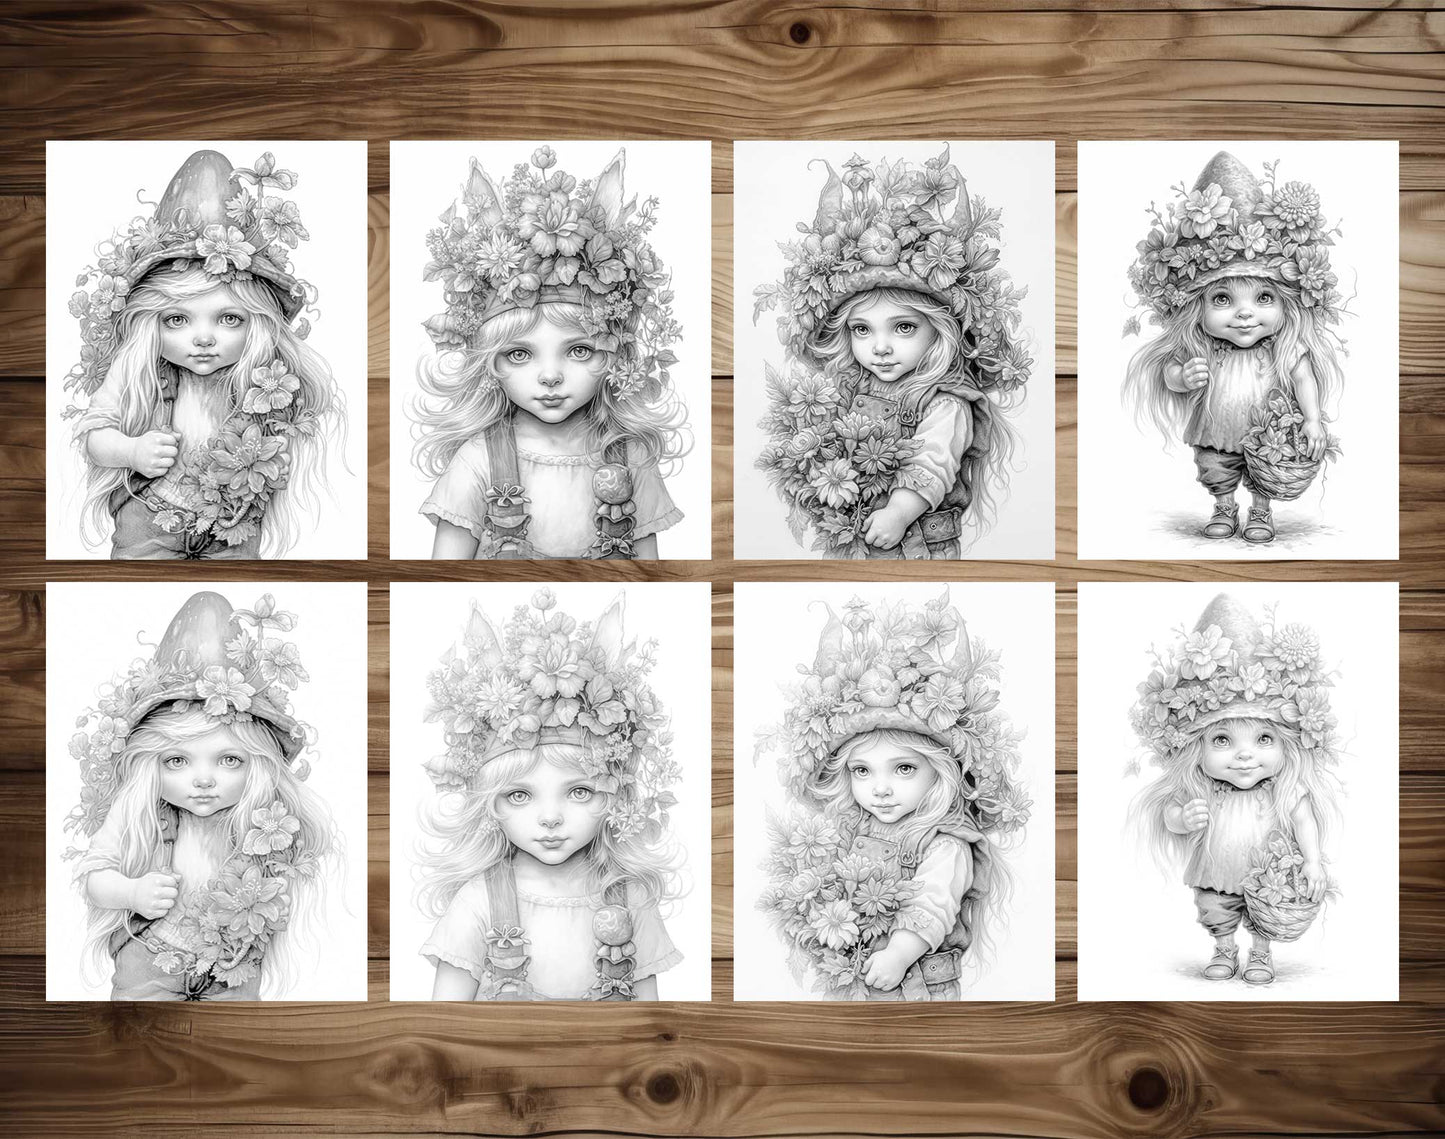 25 Adorable Gnome Girls Grayscale Coloring Pages - Instant Download - Printable Dark/Light